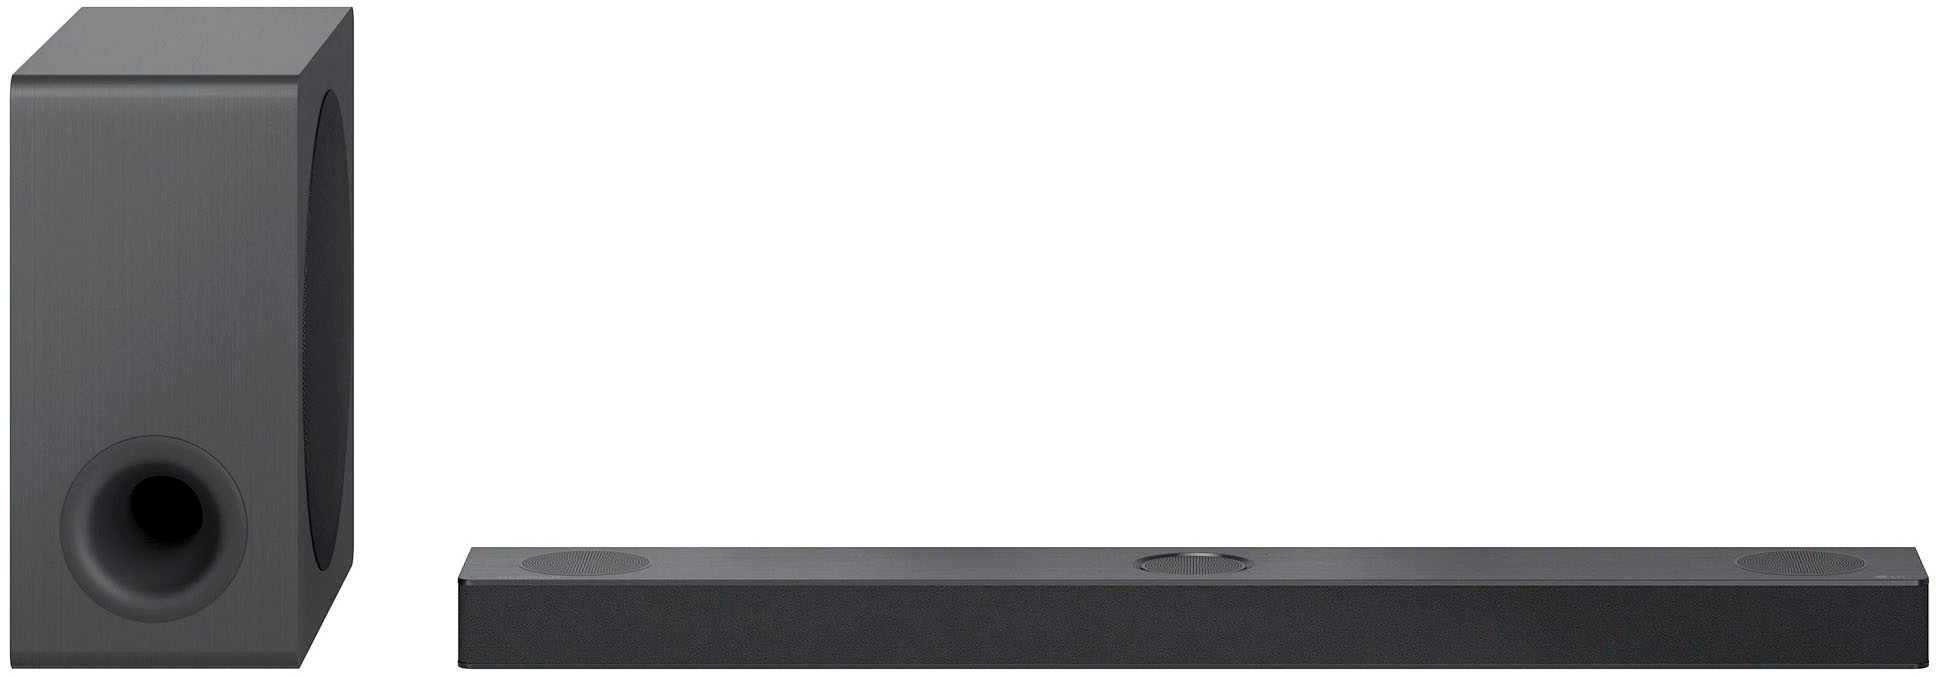 LG – 3.1.3 Channel Soundbar with Wireless Subwoofer, Dolby Atmos and DTS:X – Black